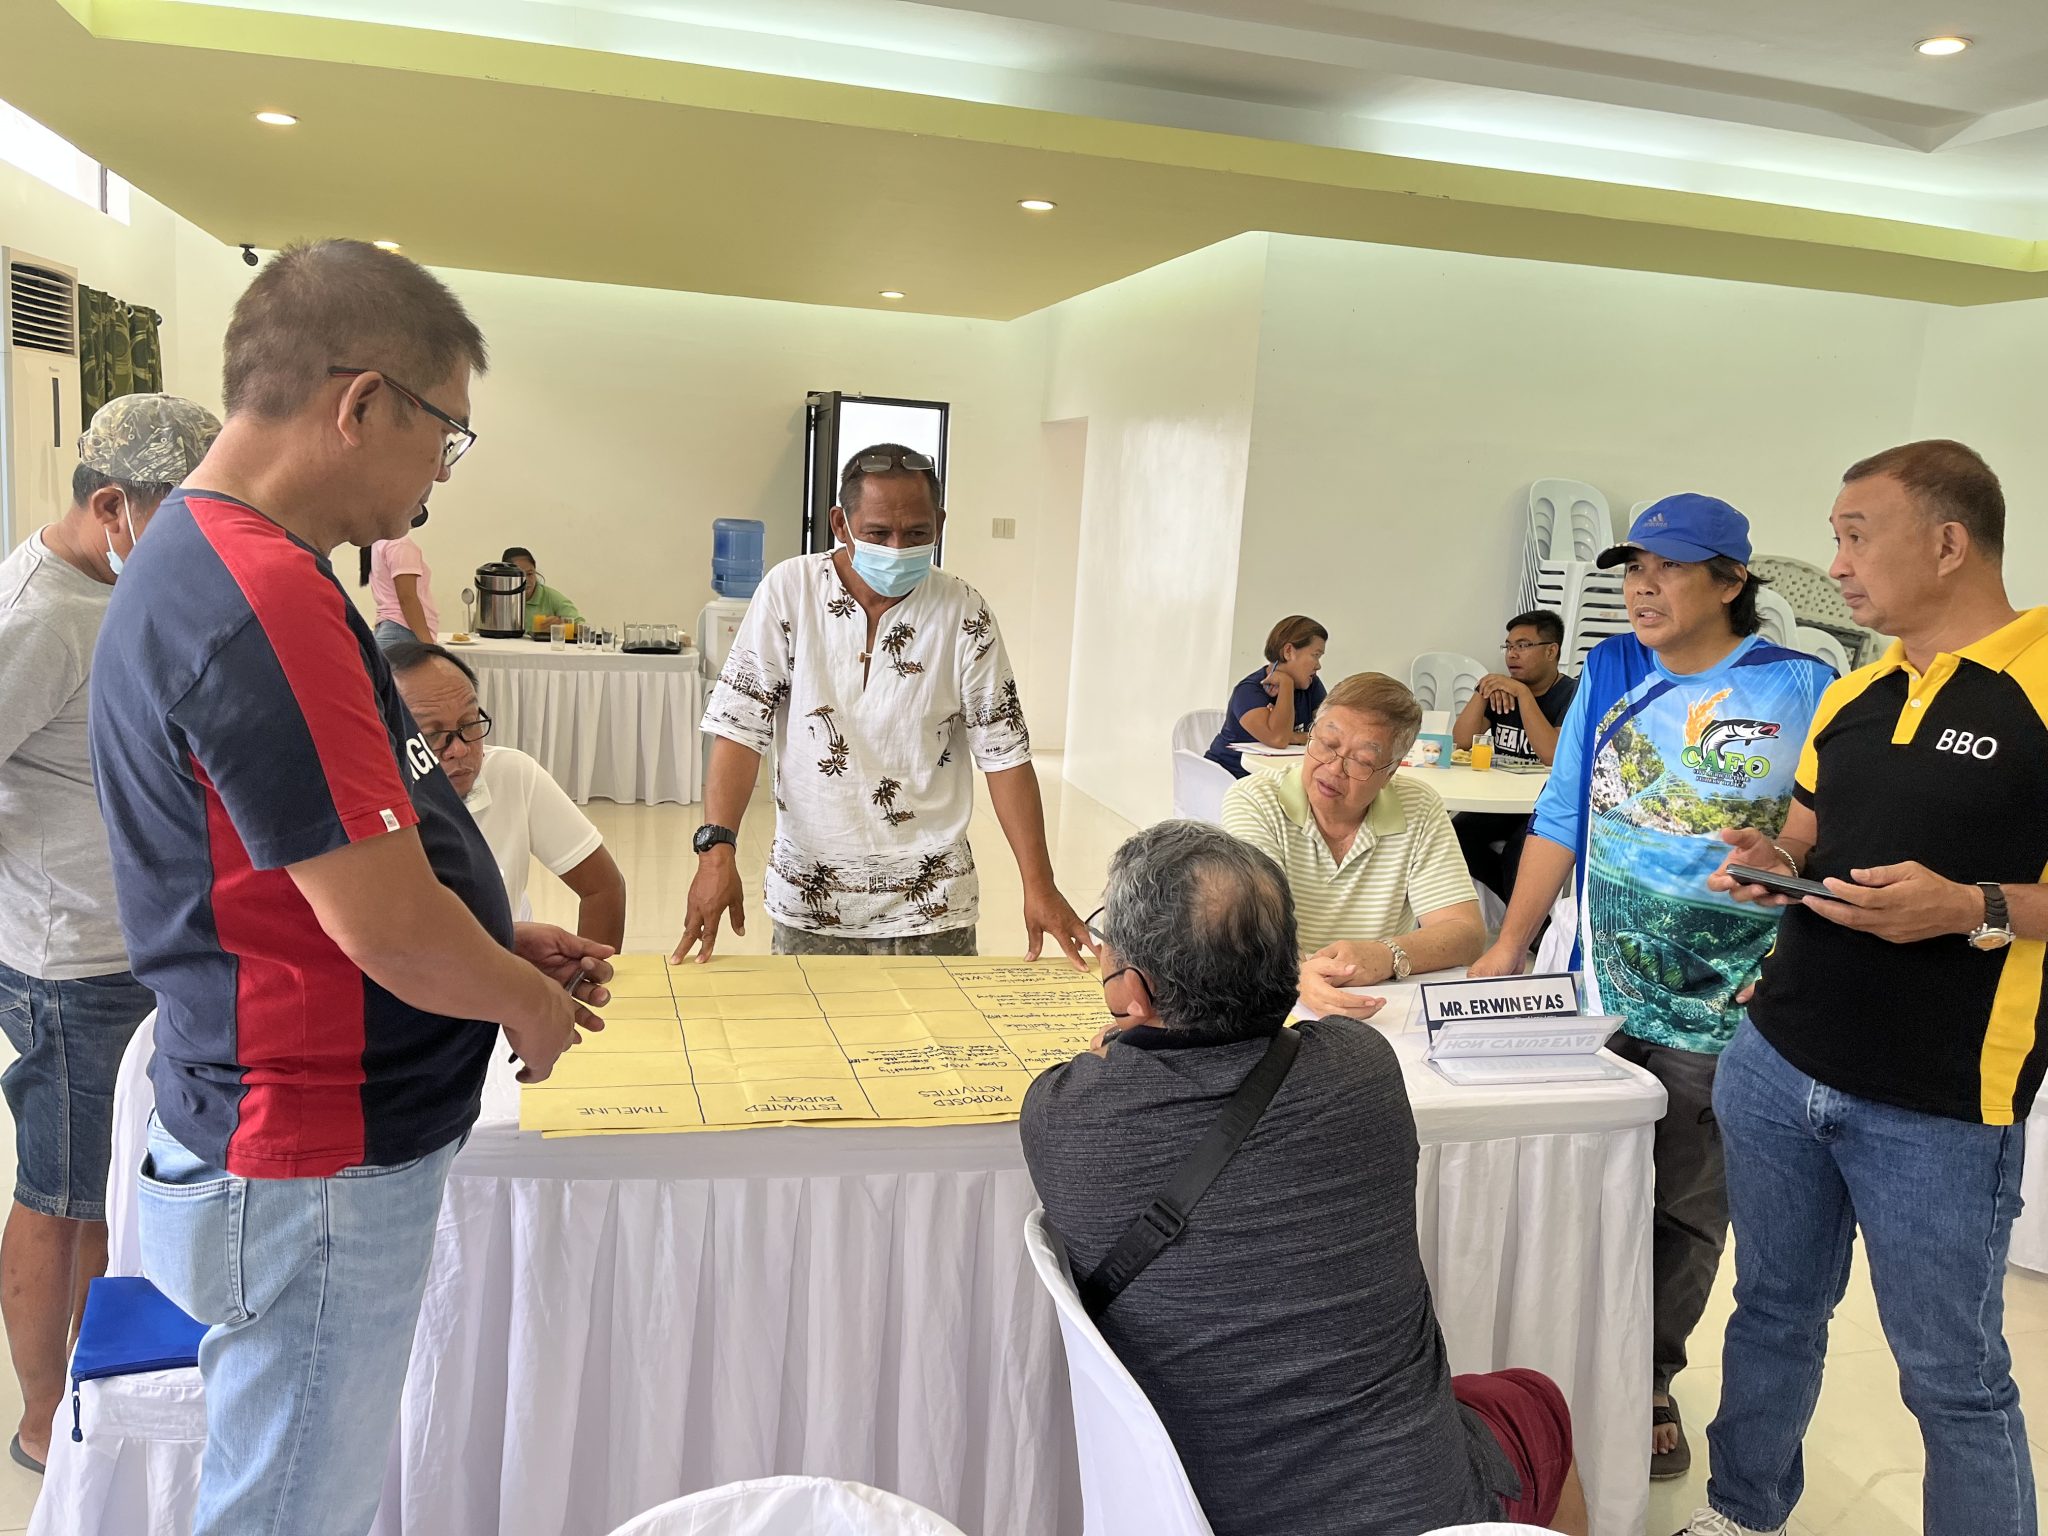 CCEF conducts MPA Establishment Training for Typhoon Odette Resiliency